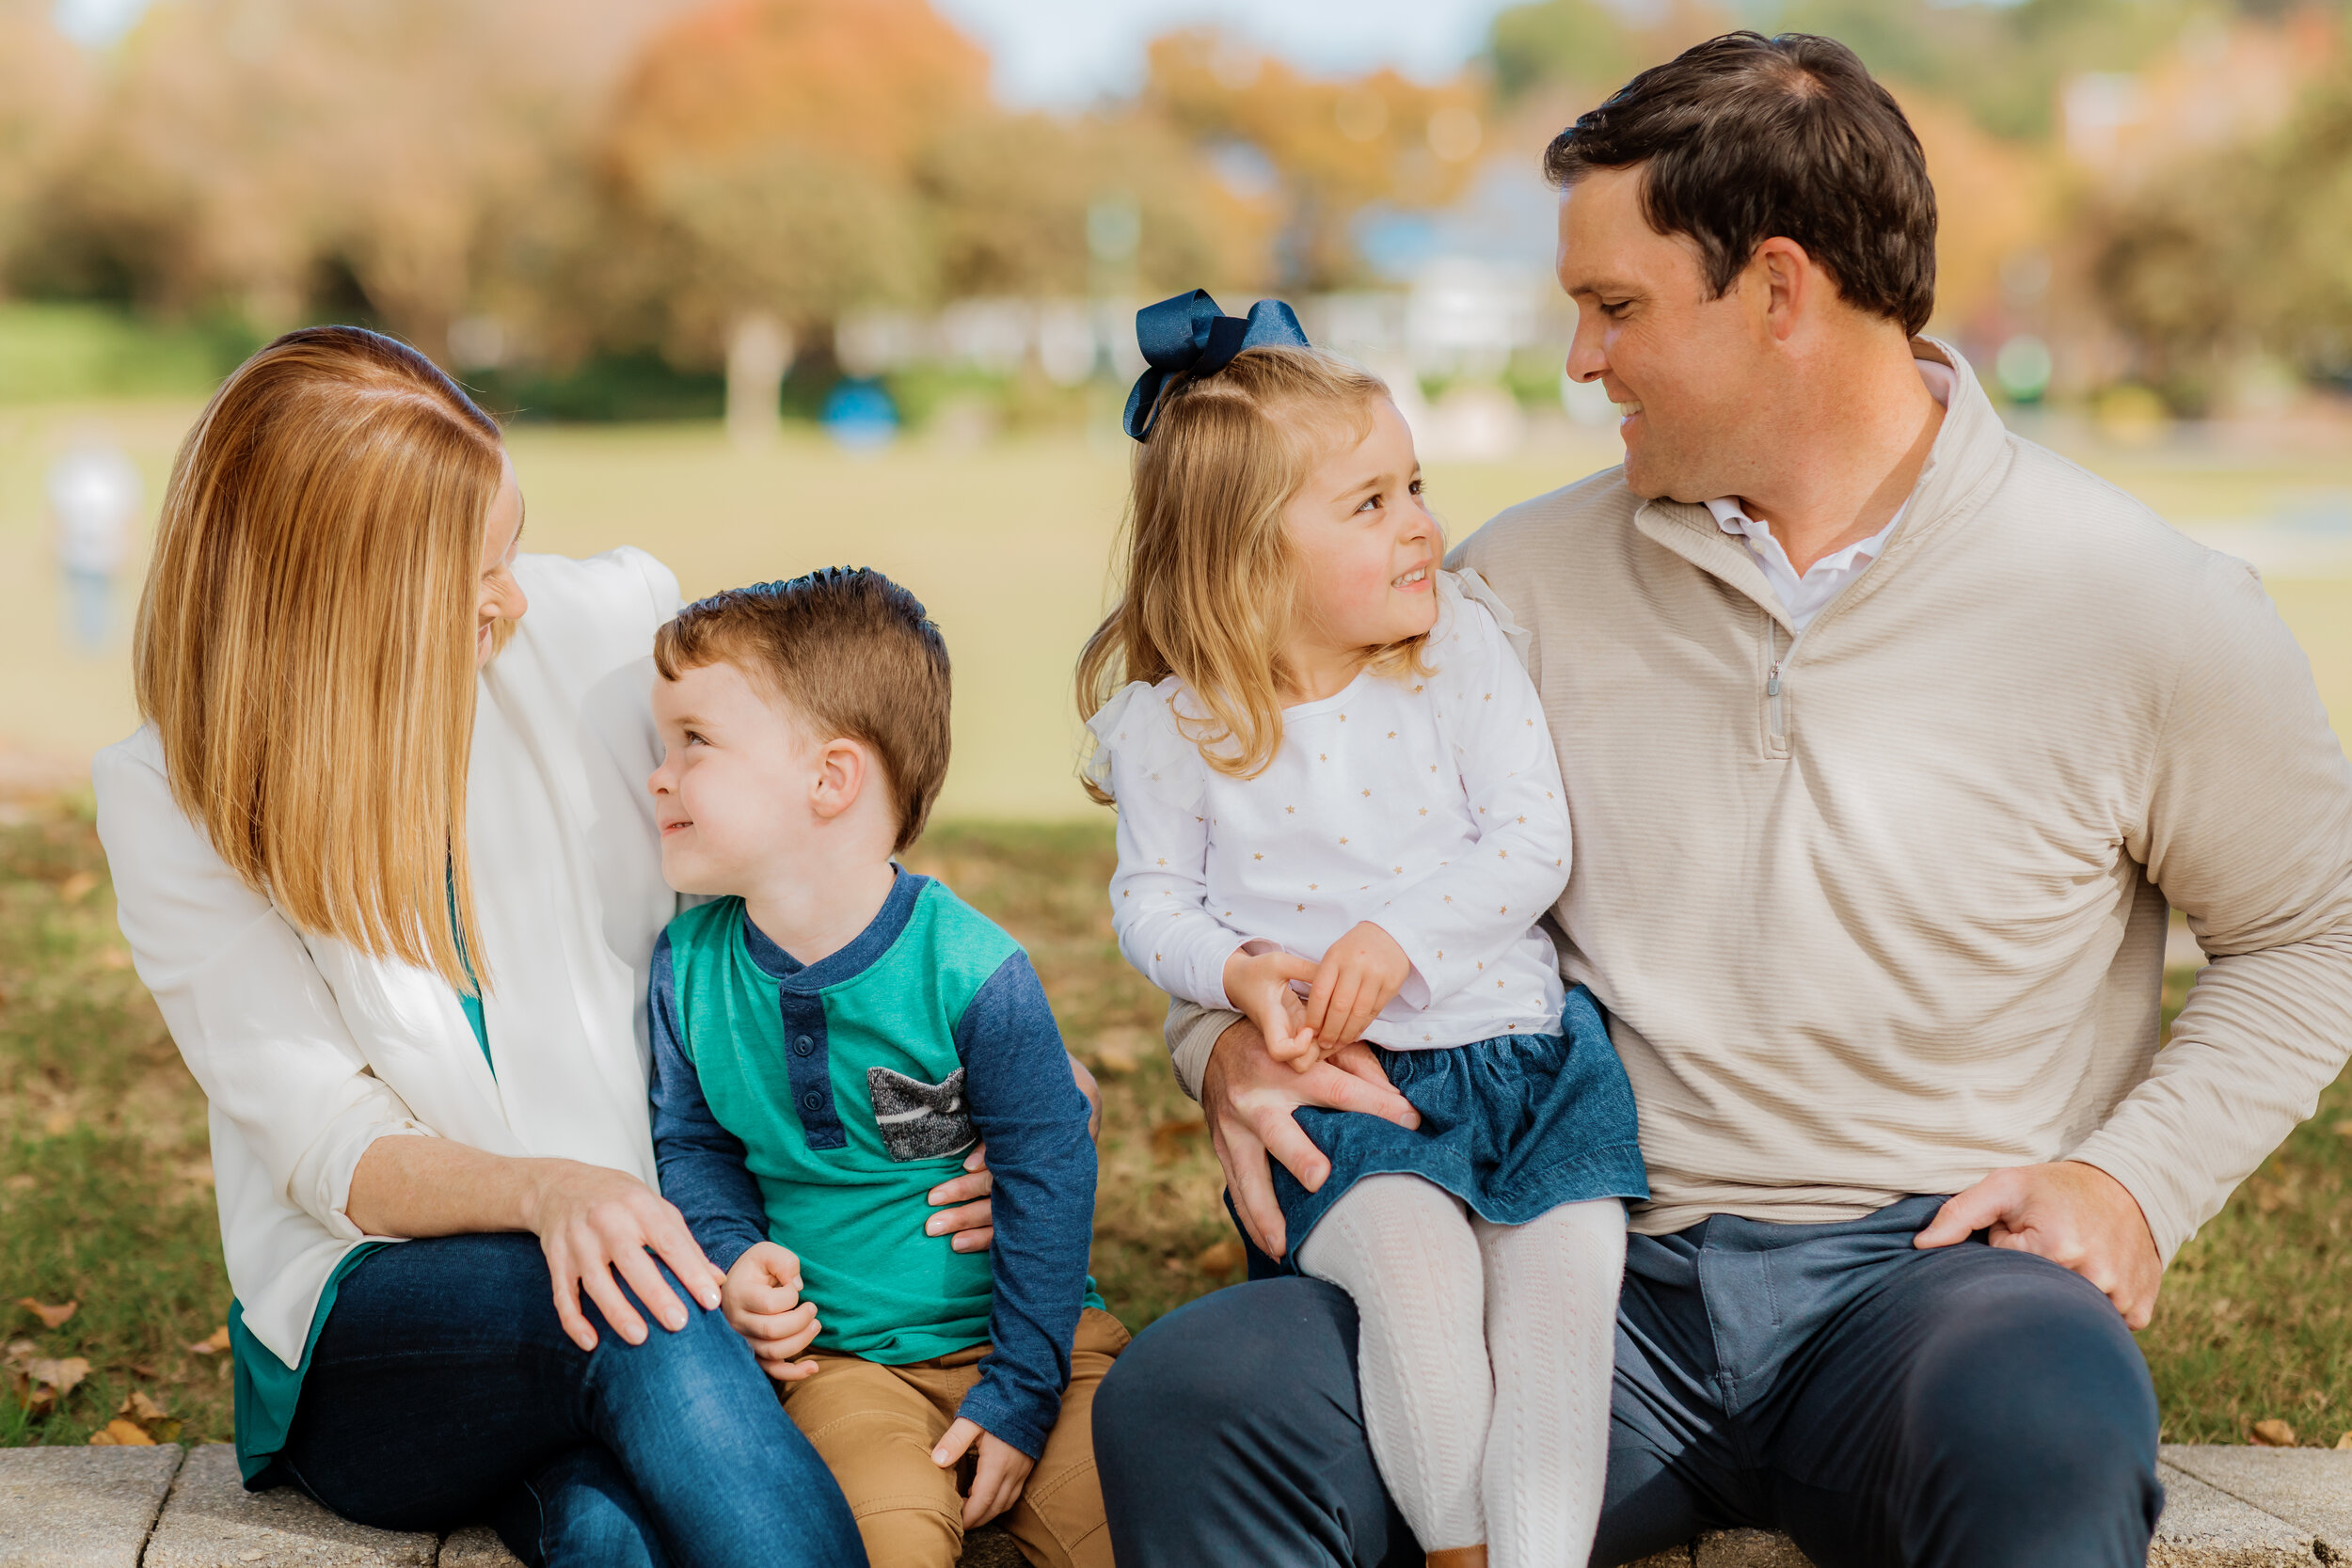 Family_Session_Coolidge_Park_Chattanooga_TN_Emily_Lester_Photography-17.jpg